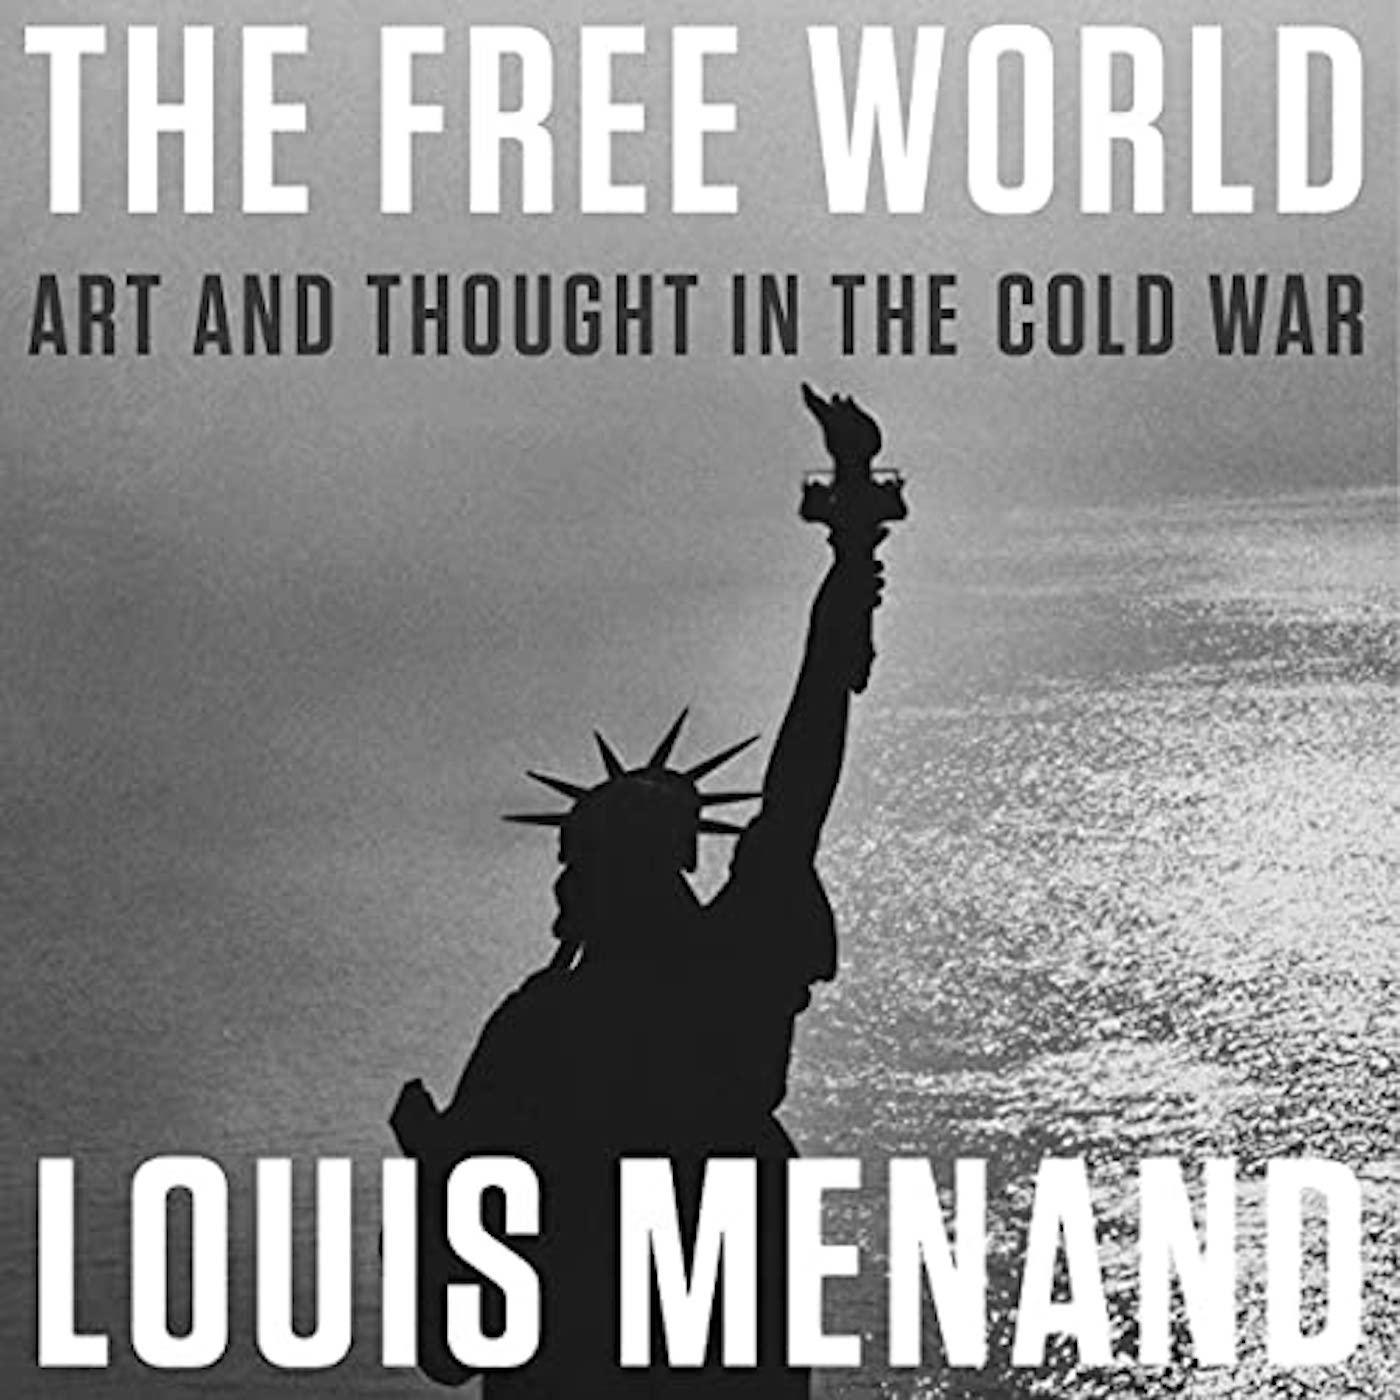 Thumbnail for "Louis Menand and the Cold War".